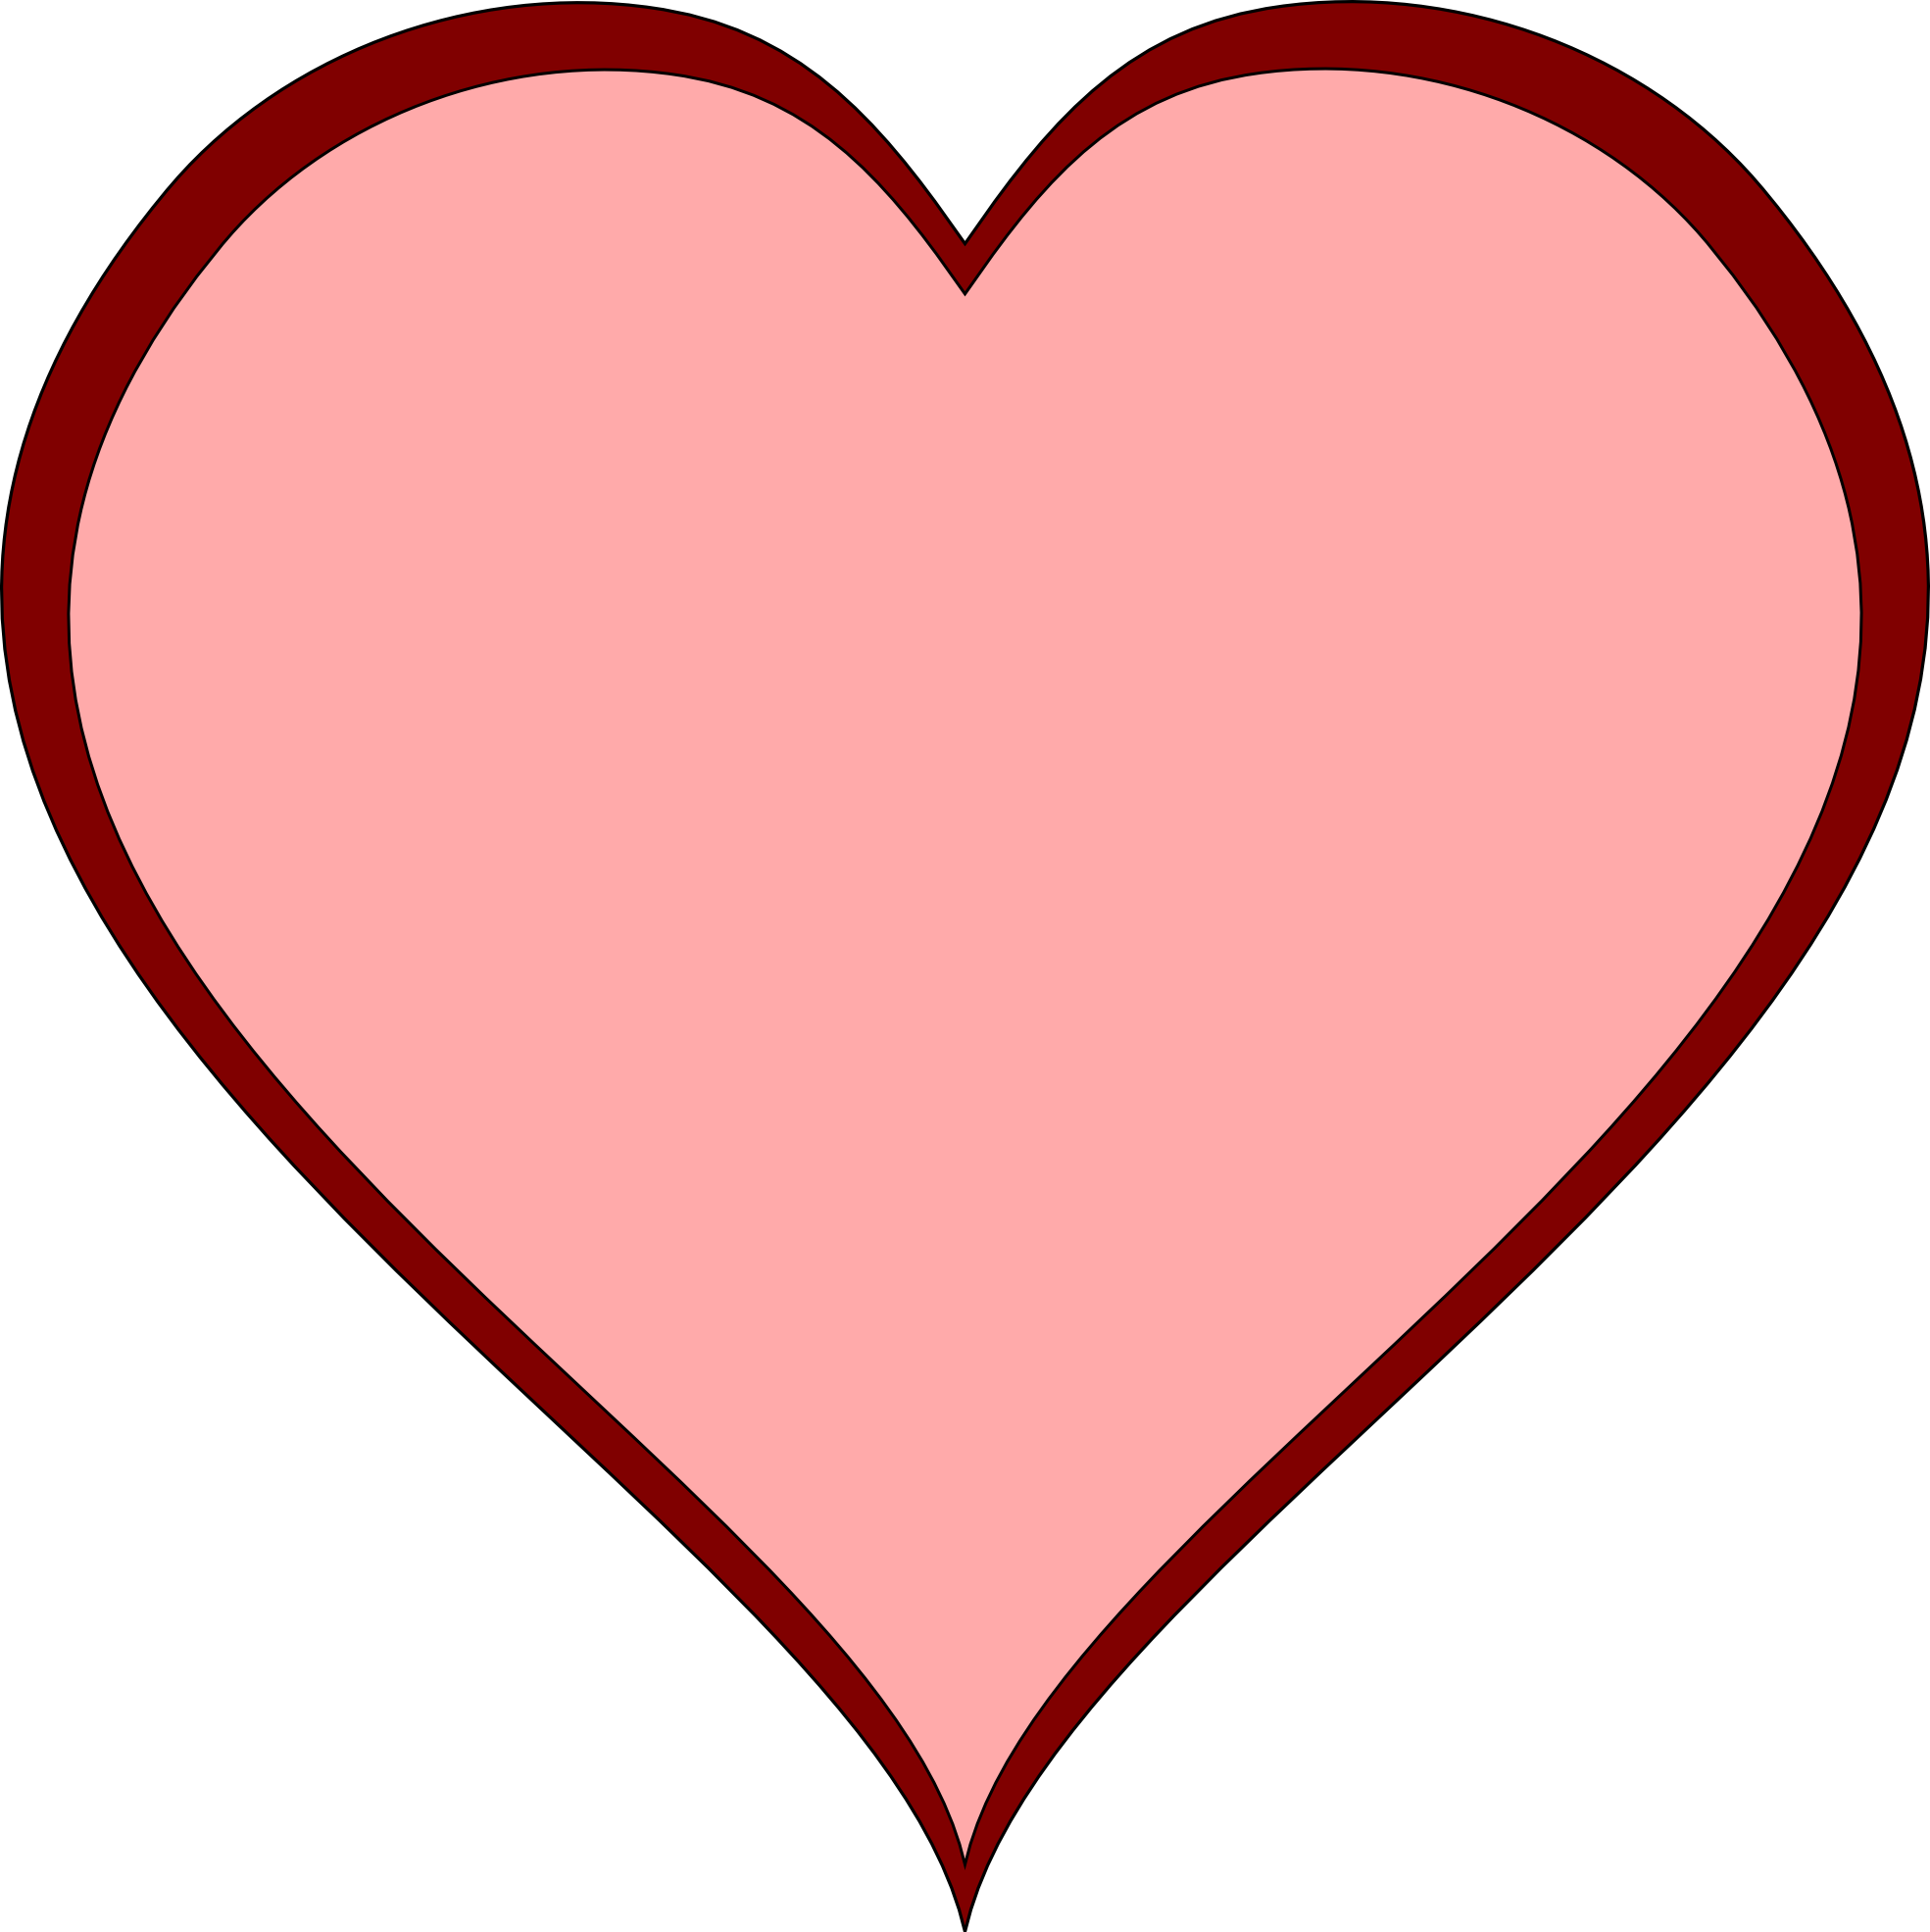 Clip Arts Related To : red heart with black outline. view all Vector Heart)...